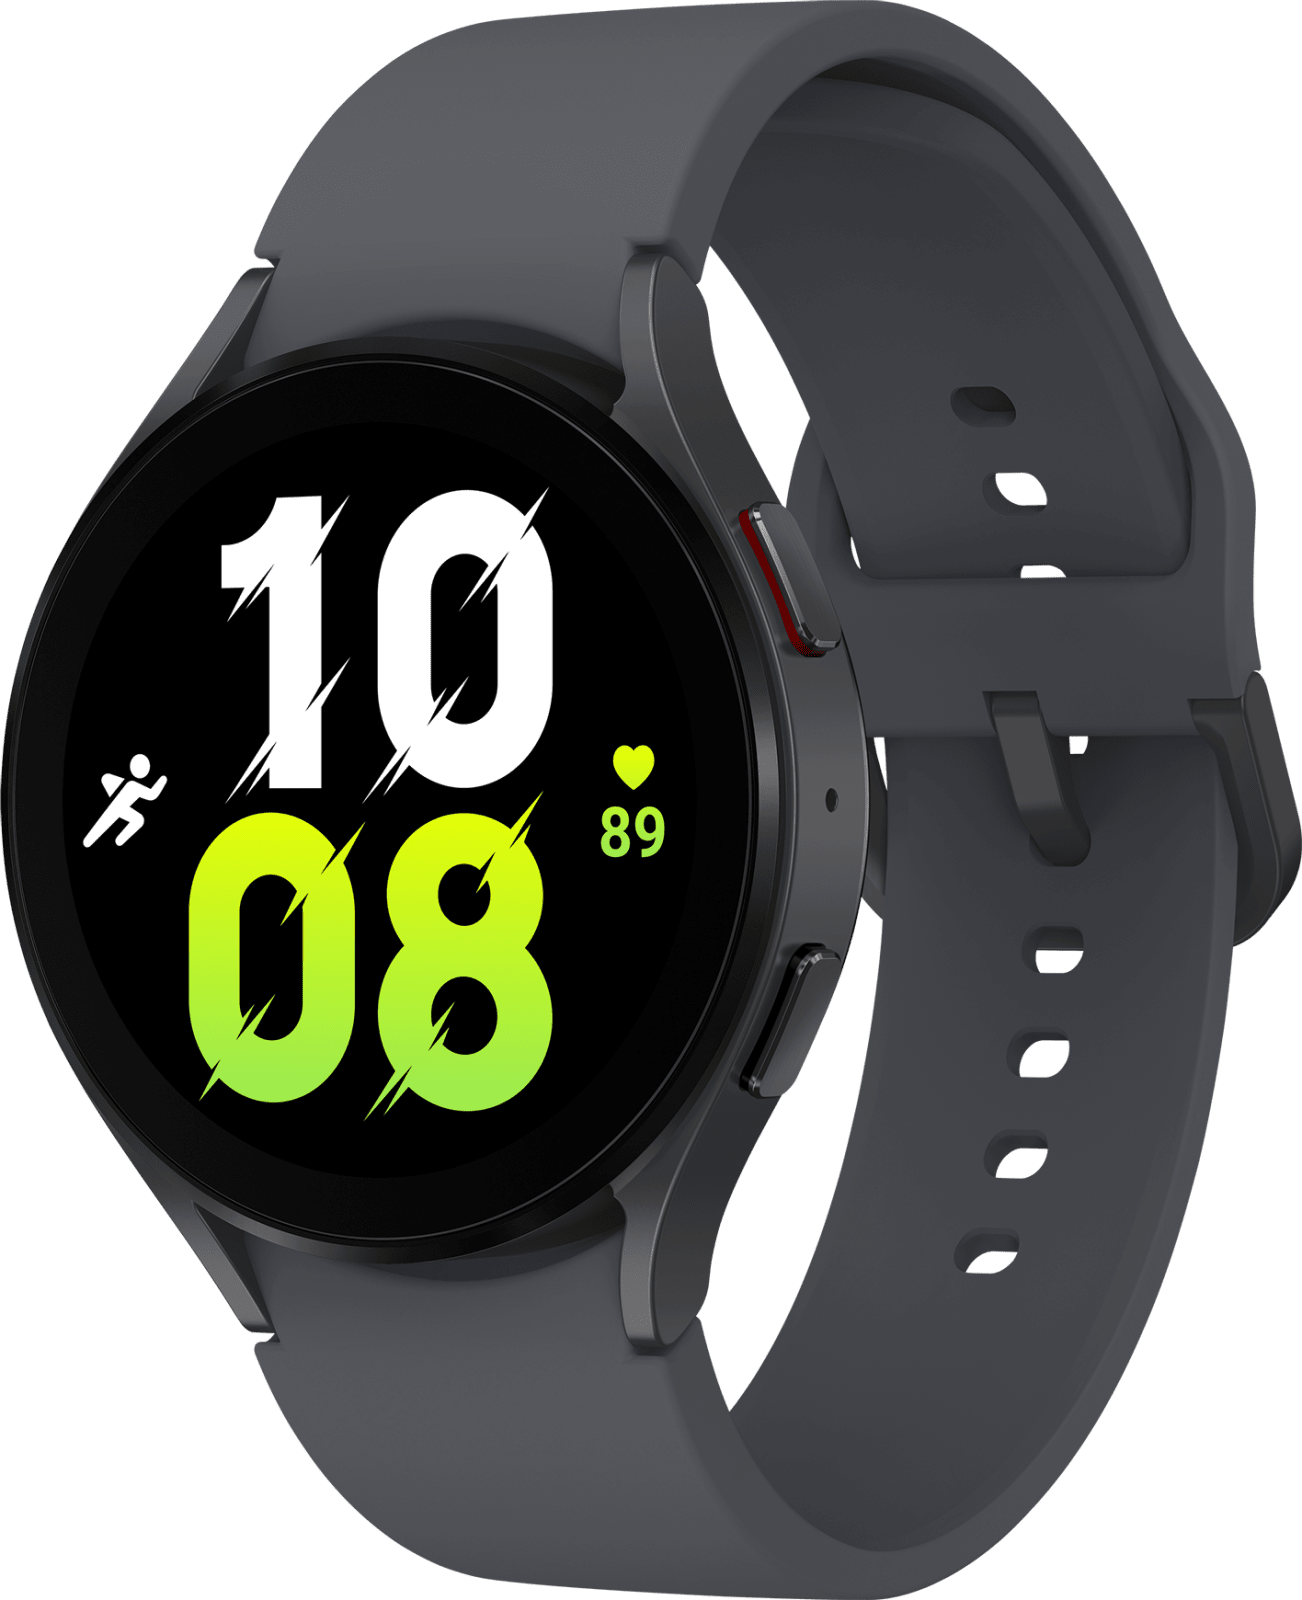 Rent Samsung Galaxy Watch Aluminium Case and Sport Band, from $19.90 per